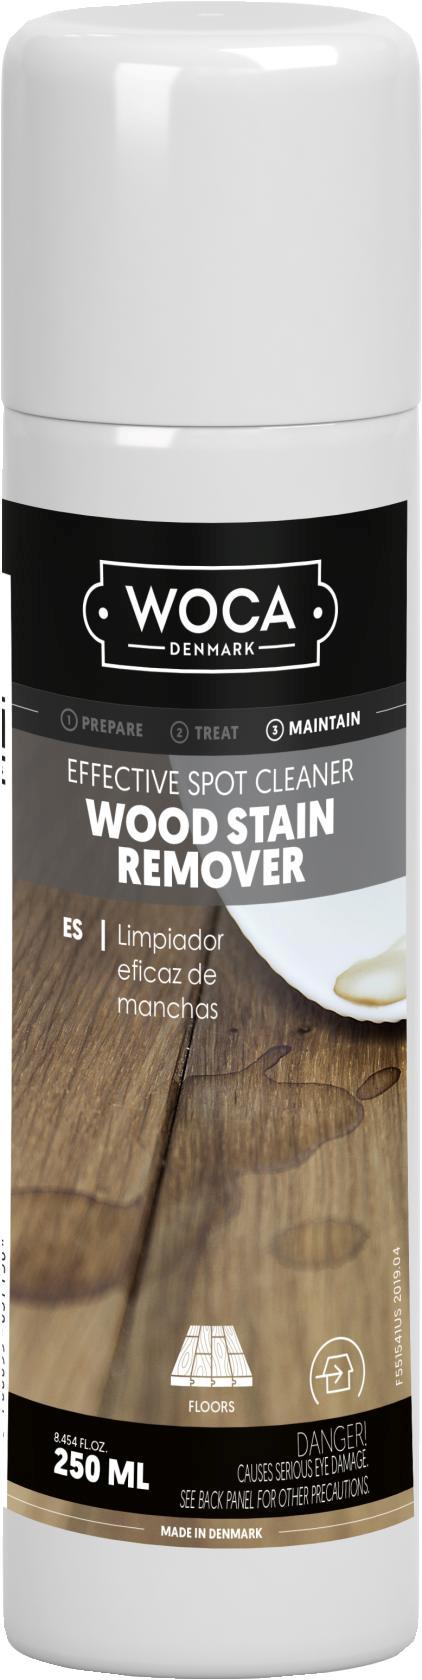 Wood Stain Remover